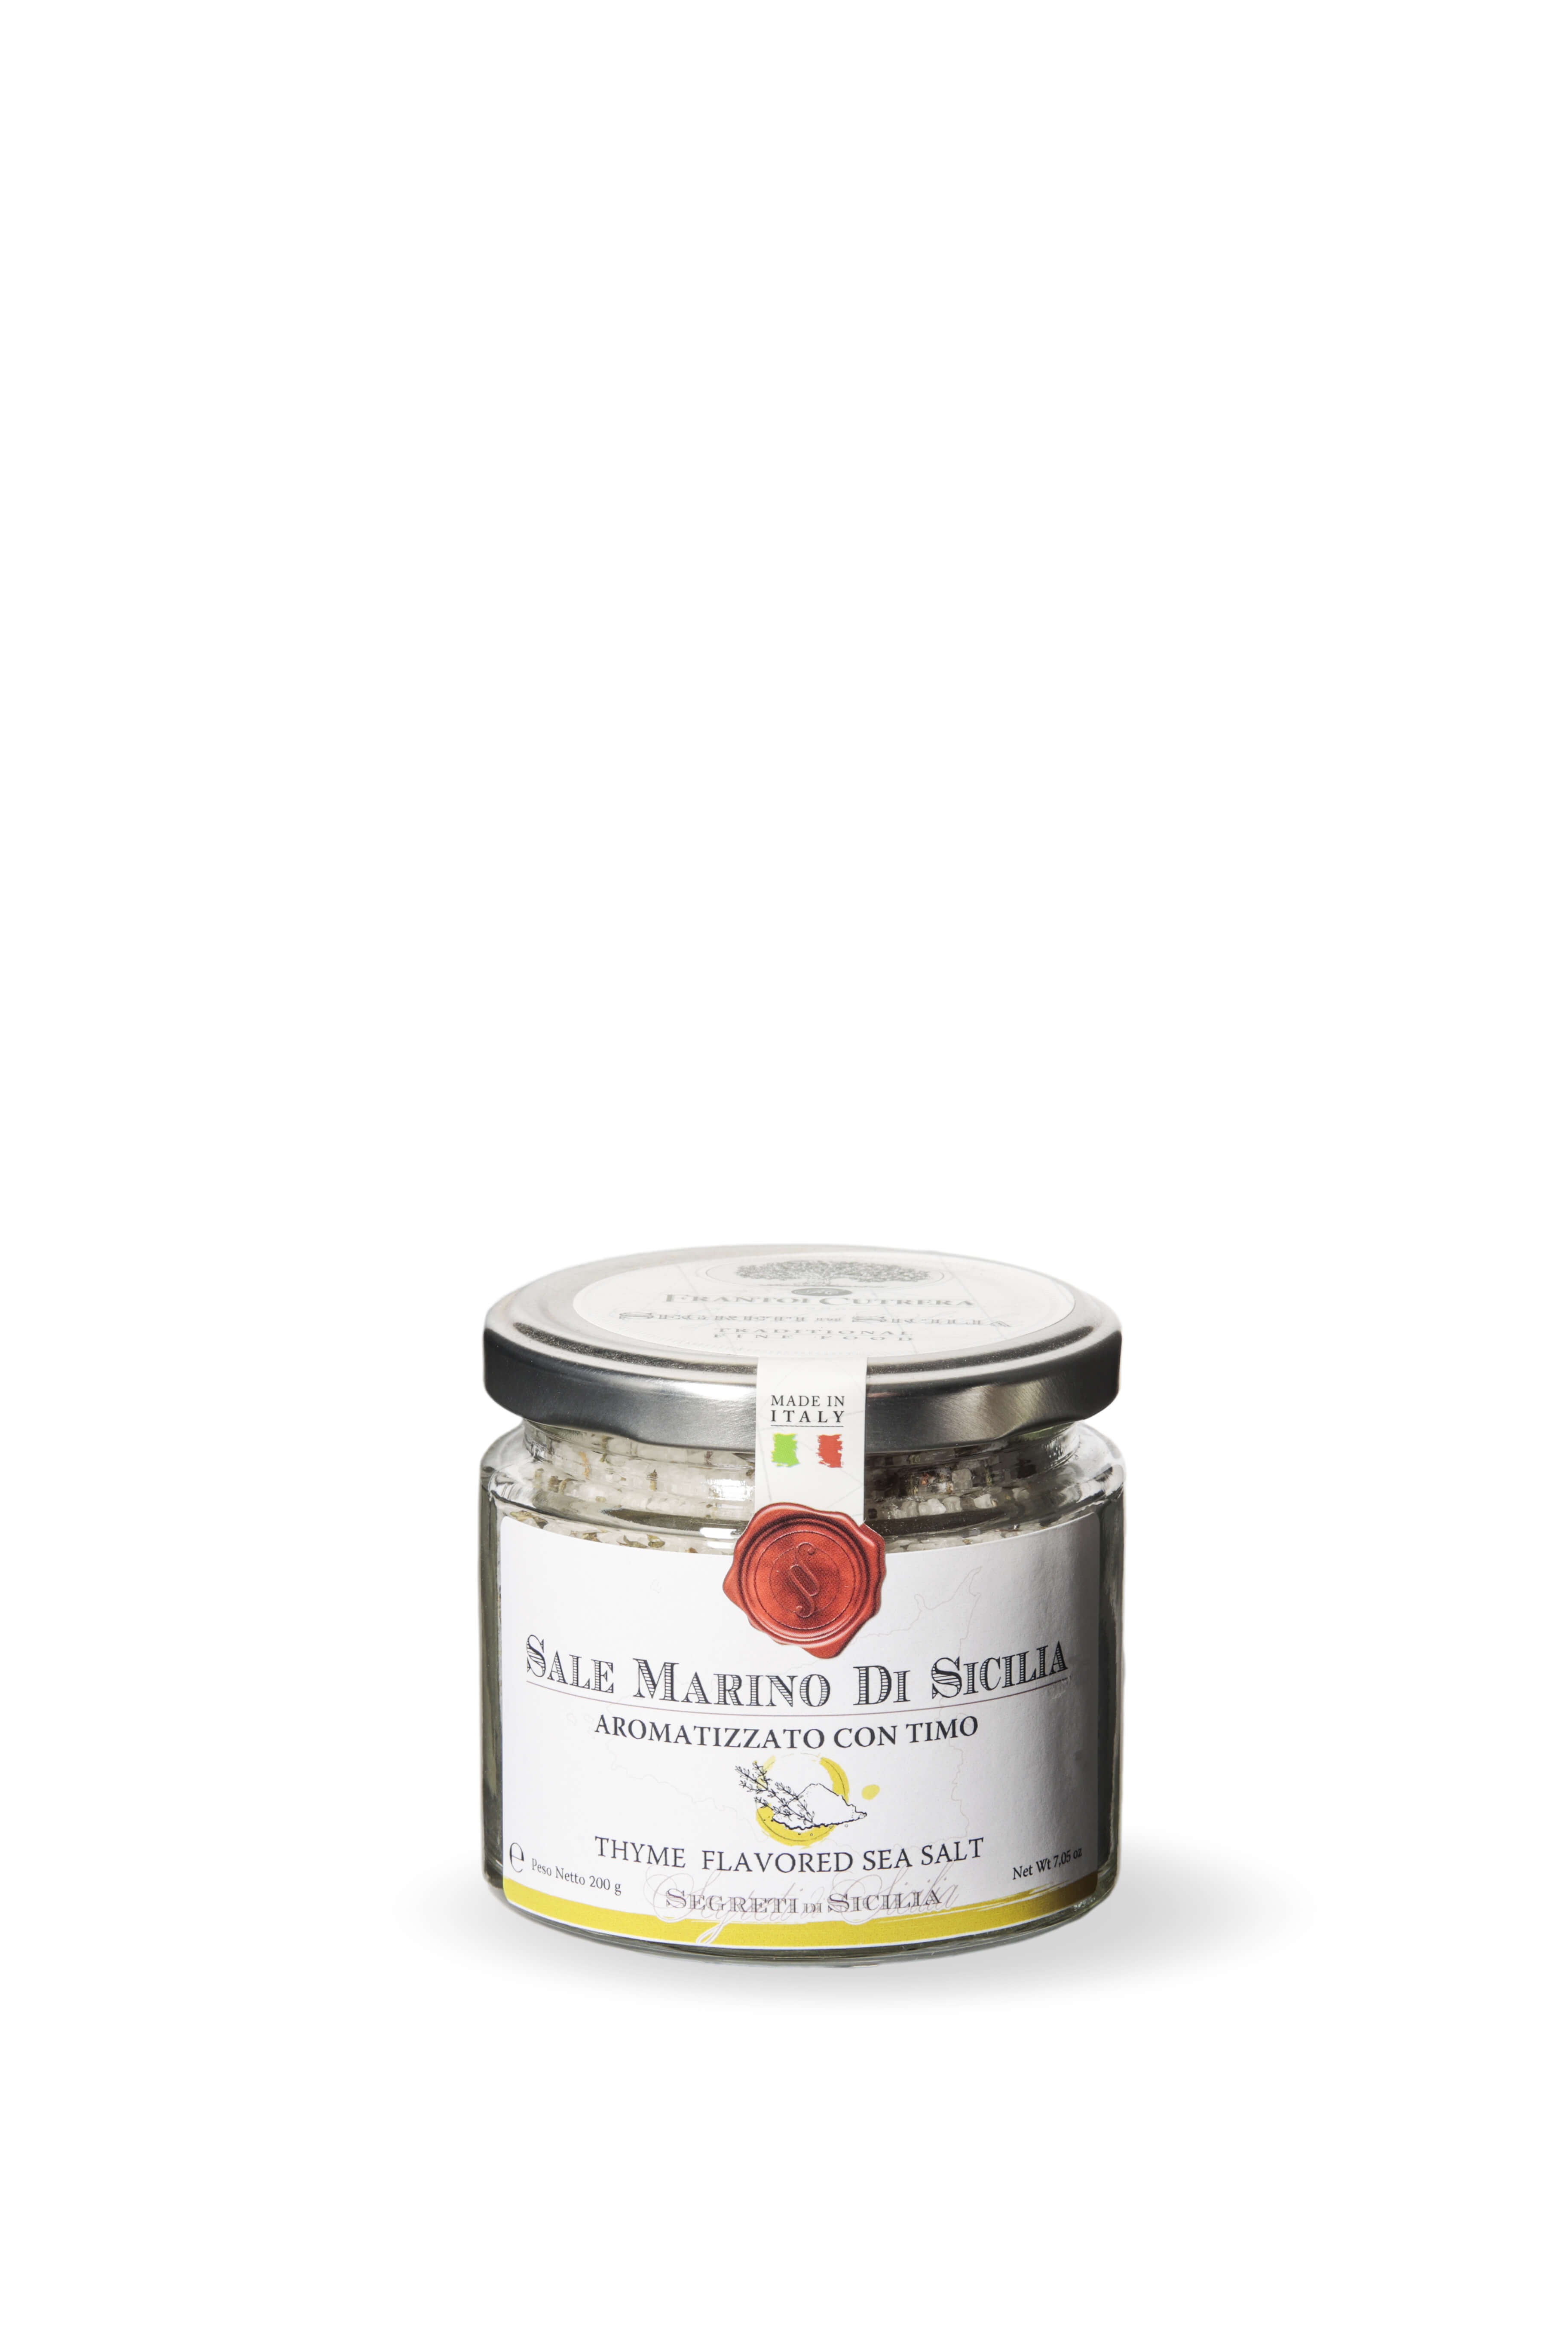 Sicilian Sea Salt Flavored with Thyme